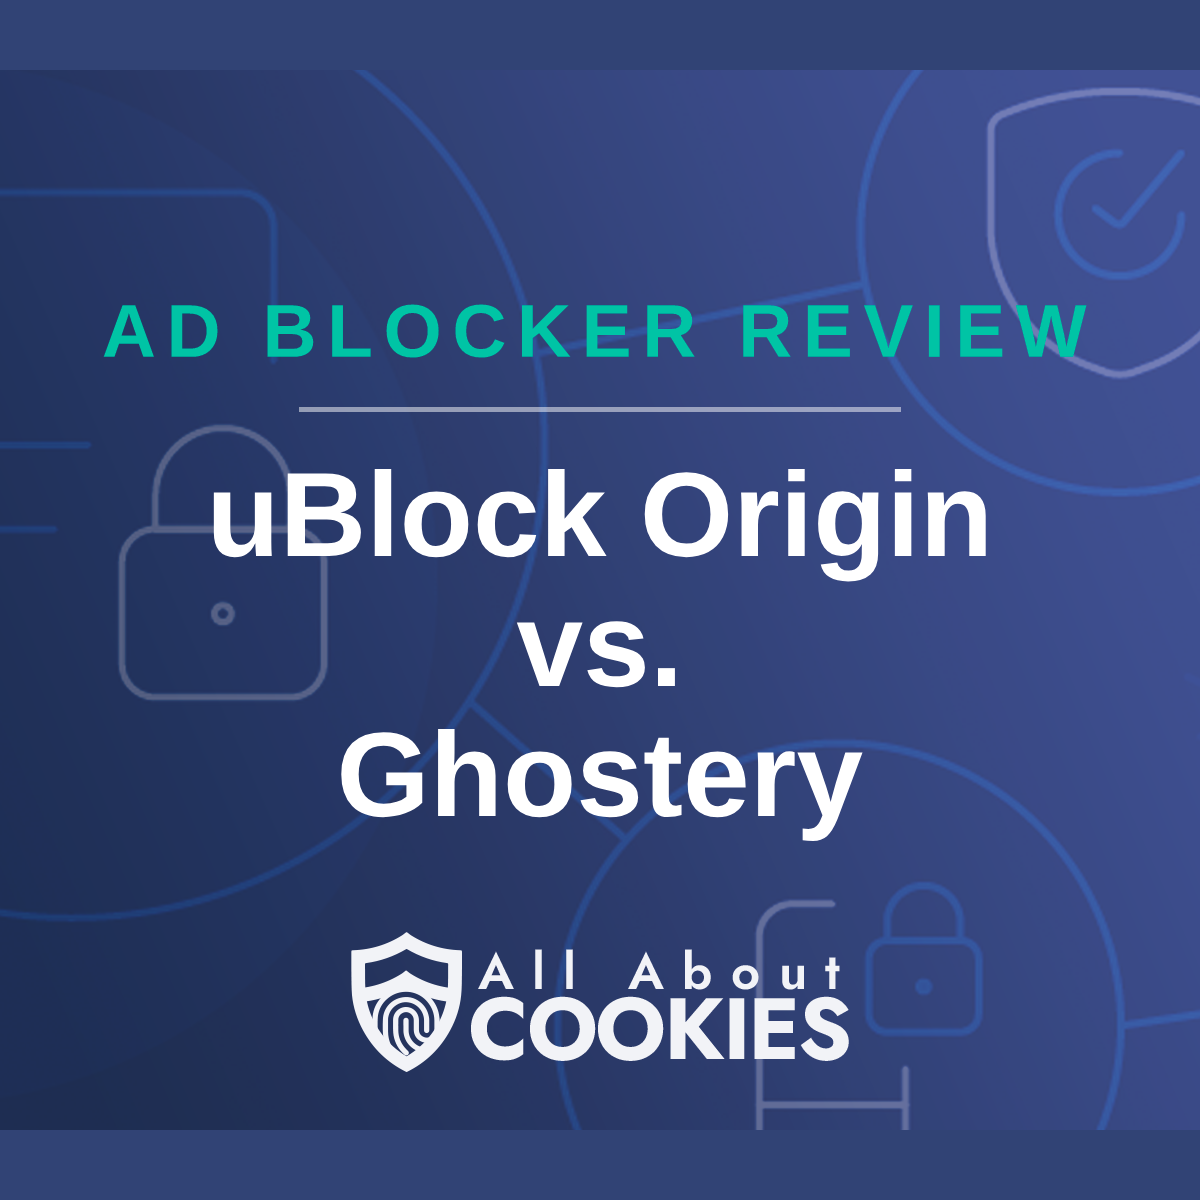 A blue background with images of locks and shields with the text “uBlock Origin vs. Ghostery” and the All About Cookies logo.